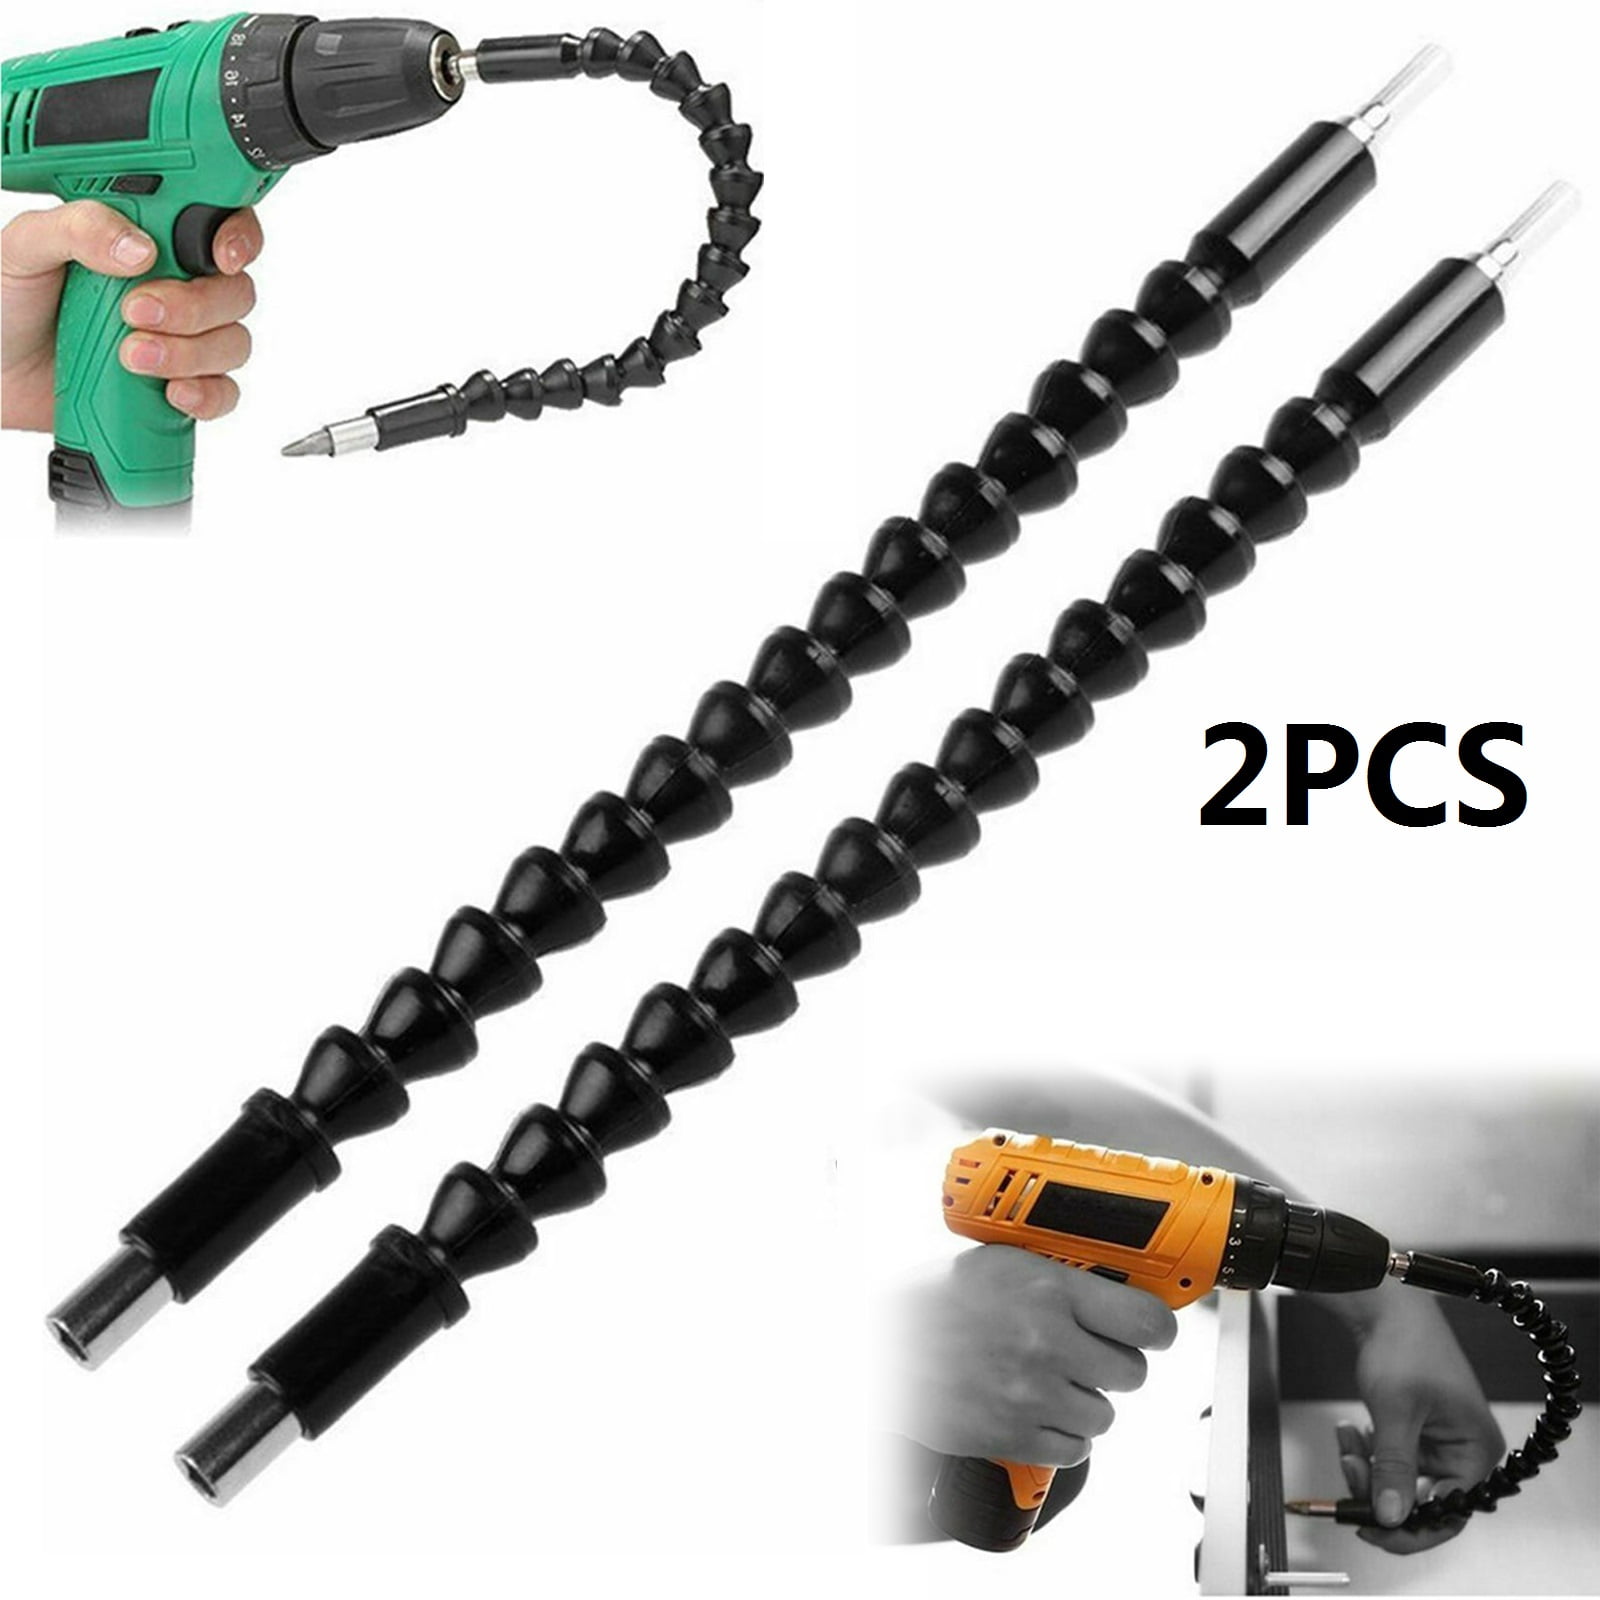 Flexible Screwdriver Extension for Connect Drive Shaft Tip Drill Bit Kit Adaptor 300mm 3 Pcs Flexible Drill Bit Extension Holder Magnetic Hex Soft Shaft